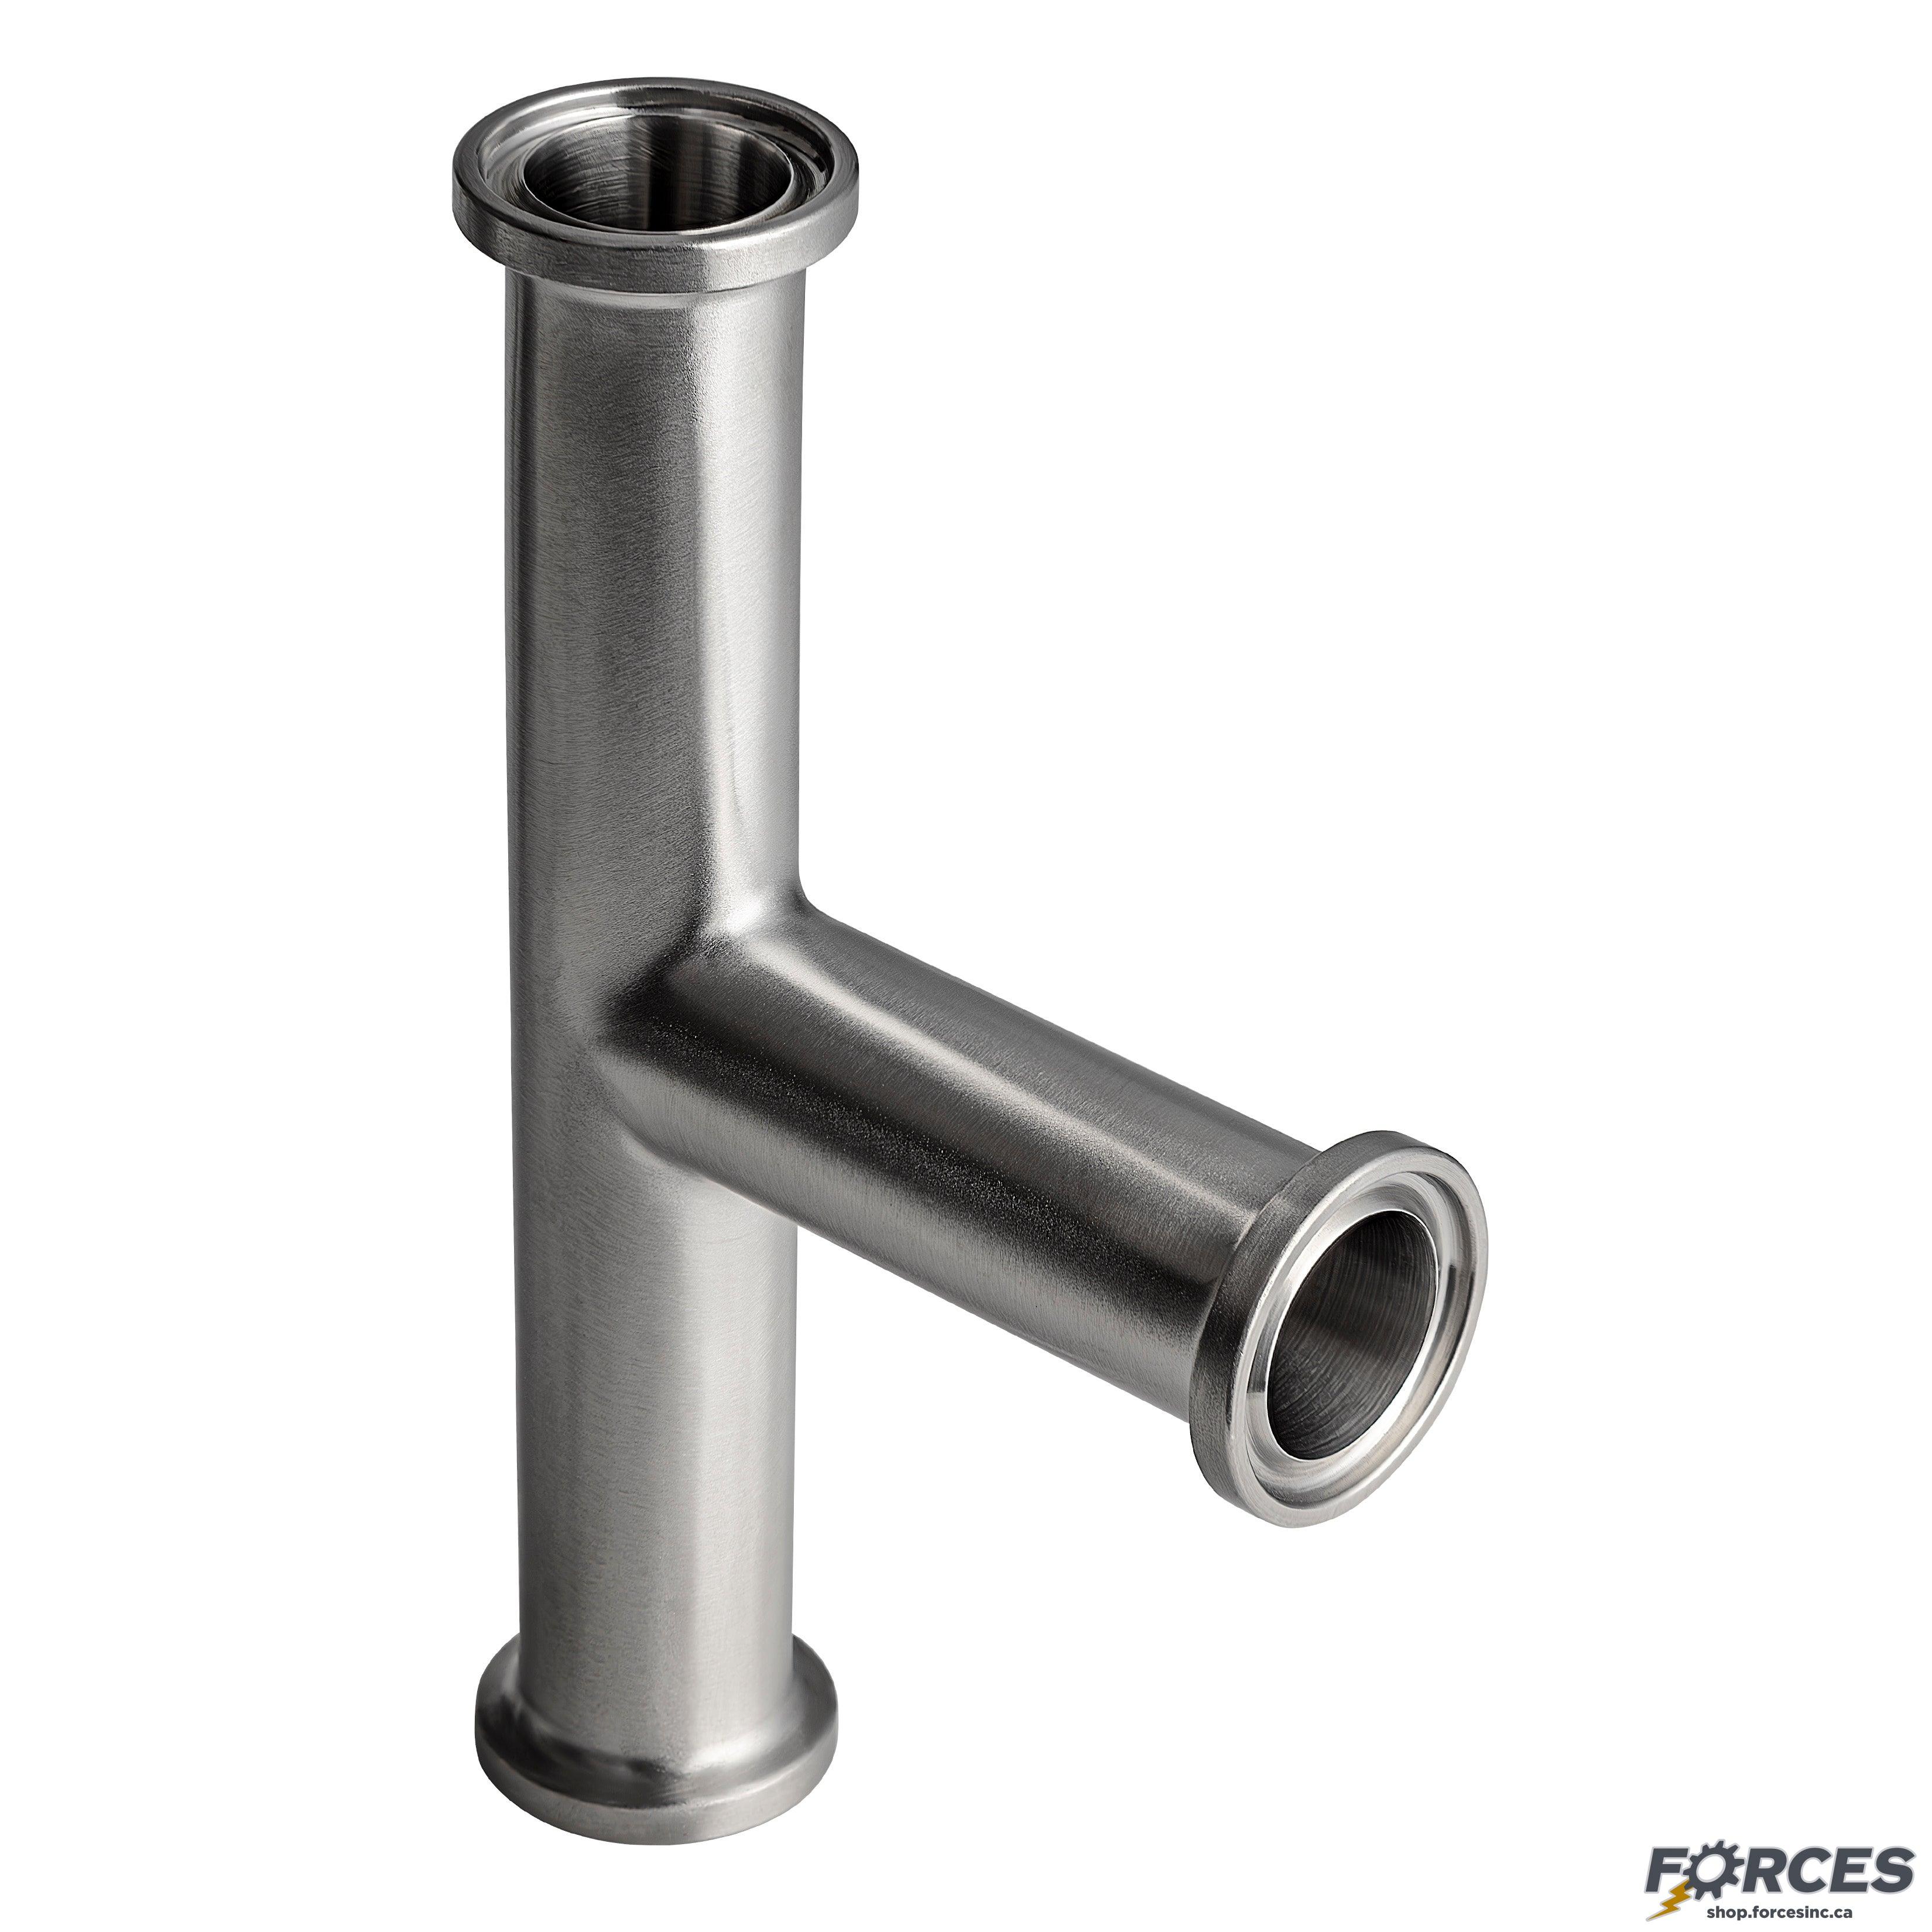 2" Tri-Clamp Tee - Stainless Steel 316 - Forces Inc